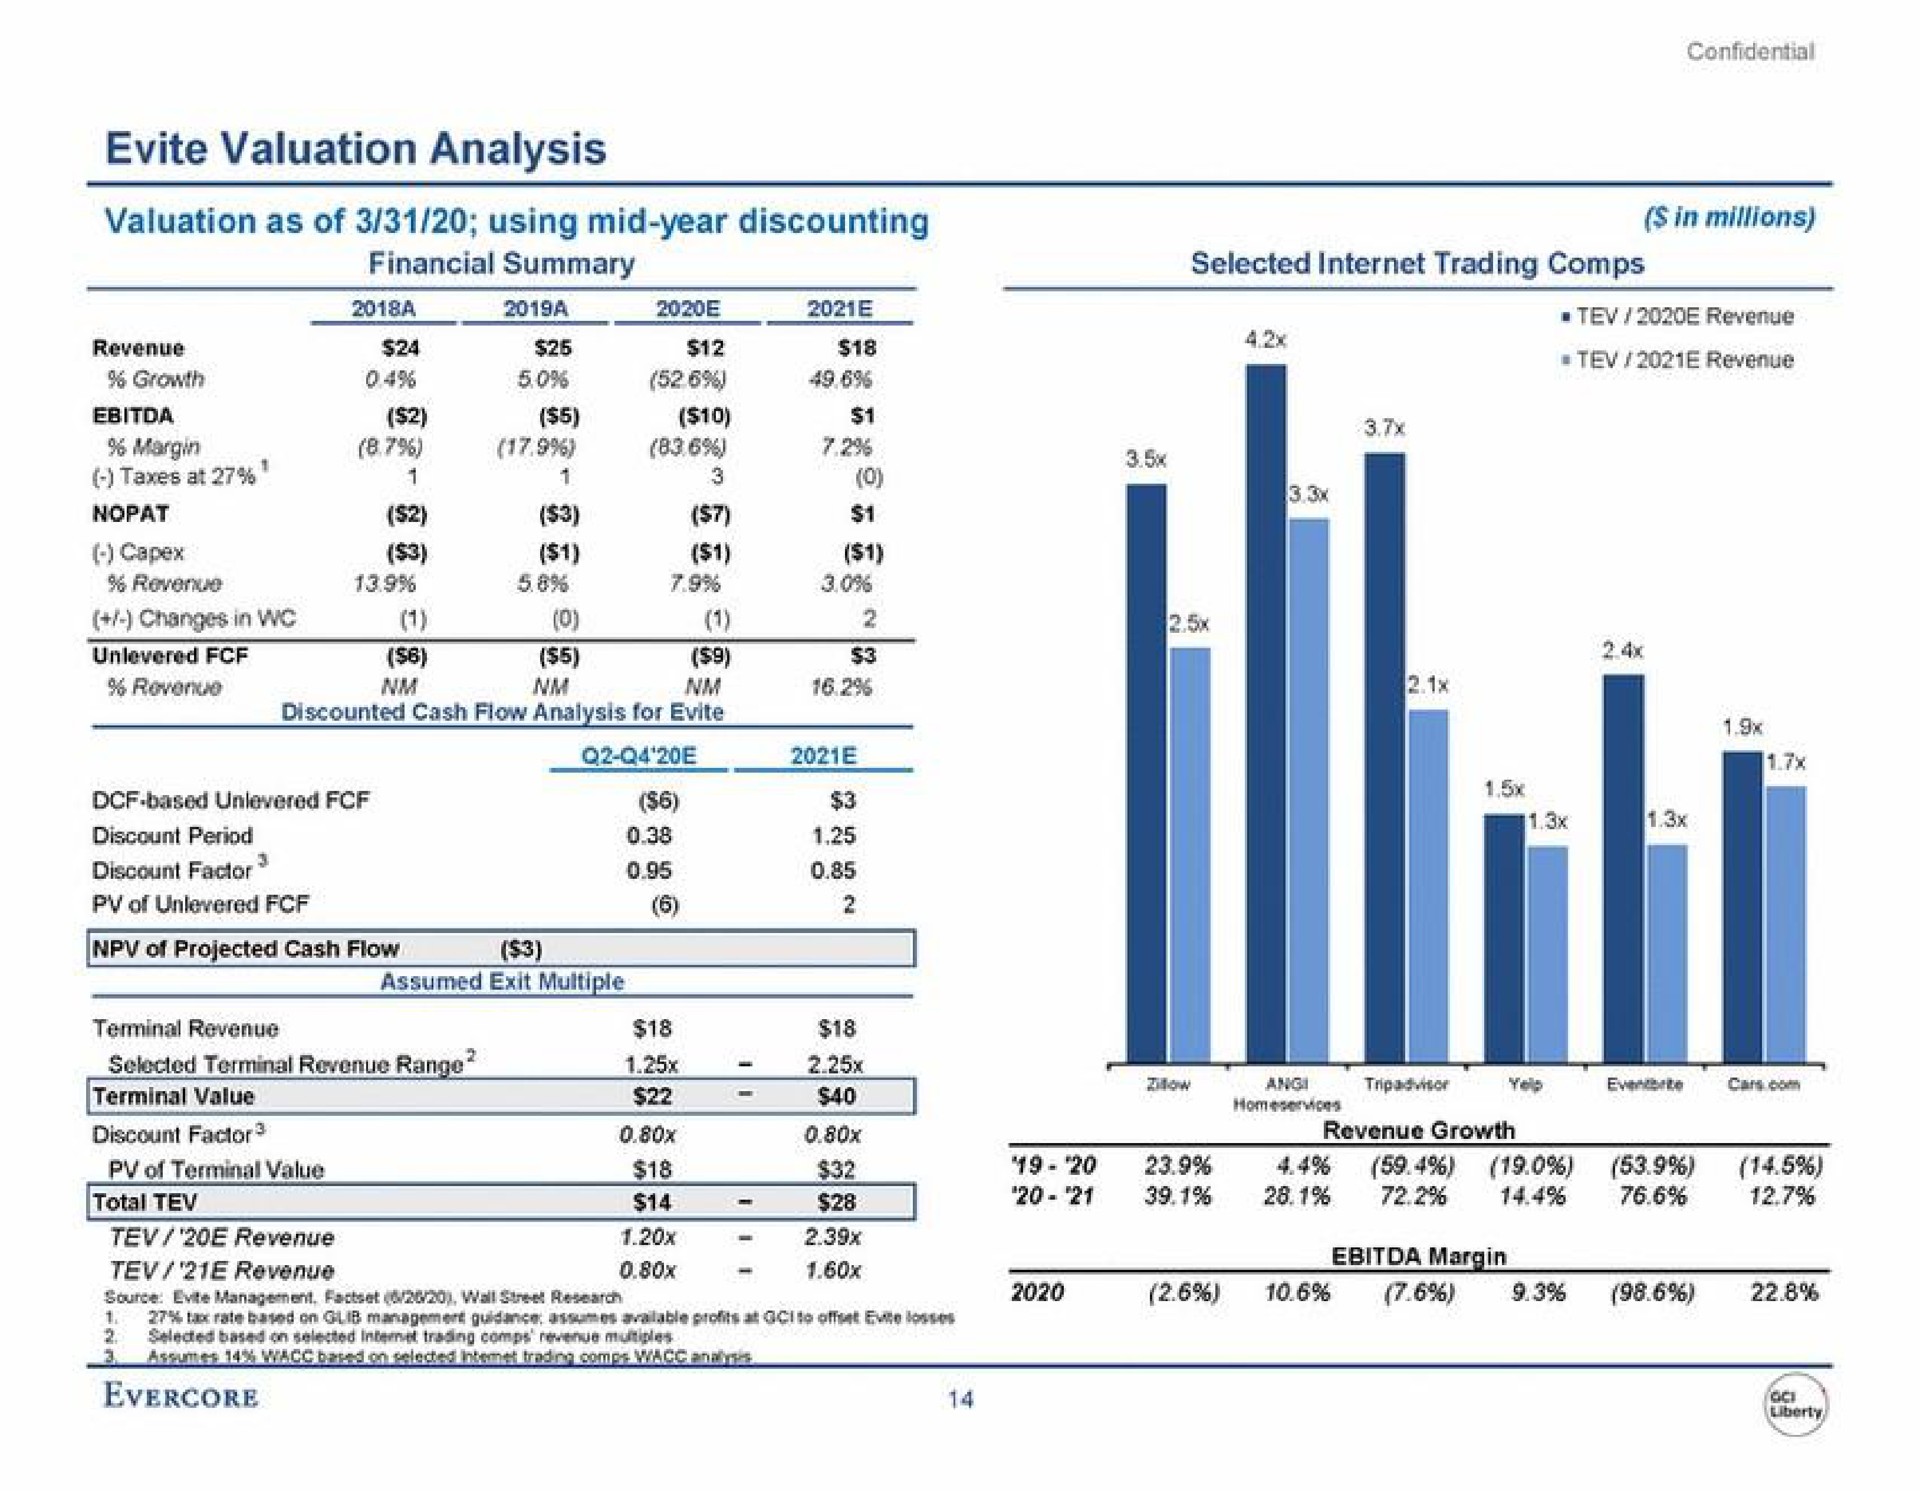 in millions ore areal valuation analysis valuation as of using mid year discounting revenue changes in selected terminal revenue range revenue | Evercore